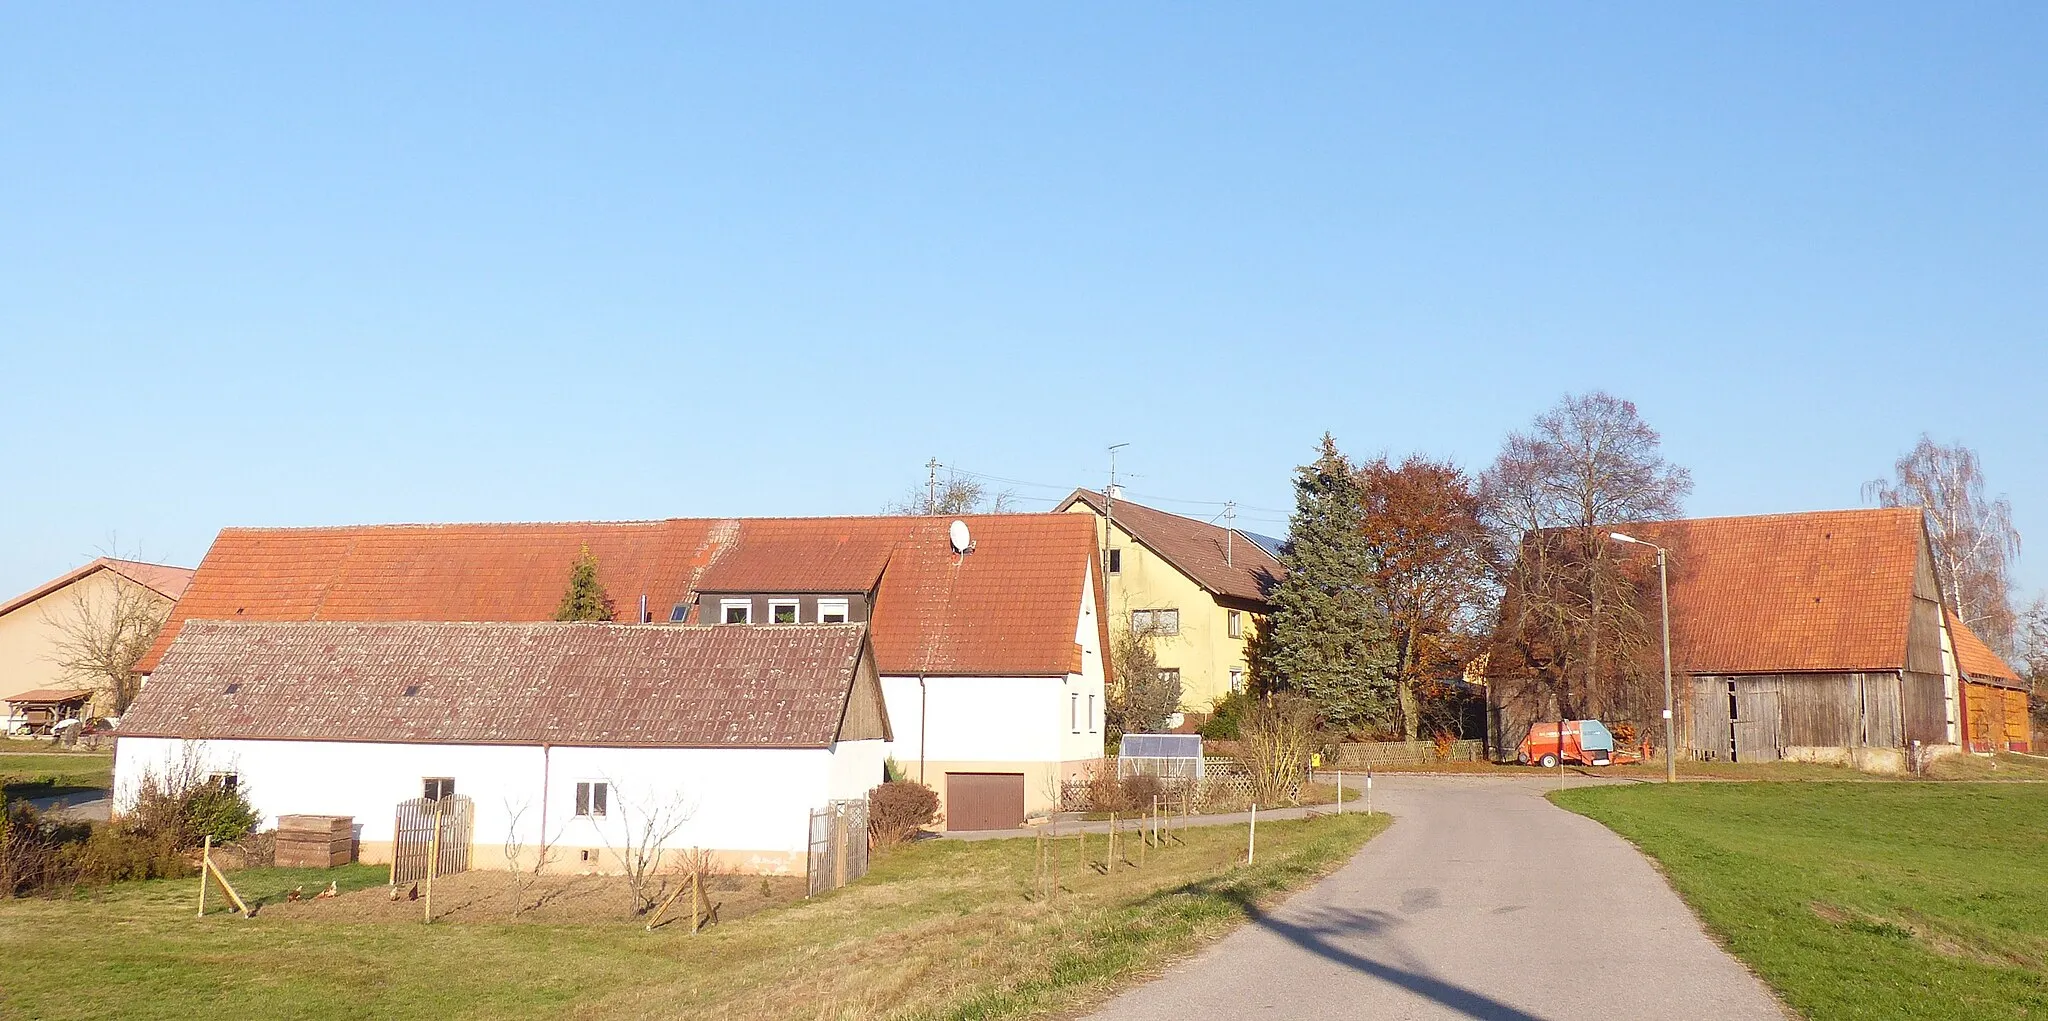 Photo showing: The hamlet Hintersteinbach, part of the municipality of Ellenberg